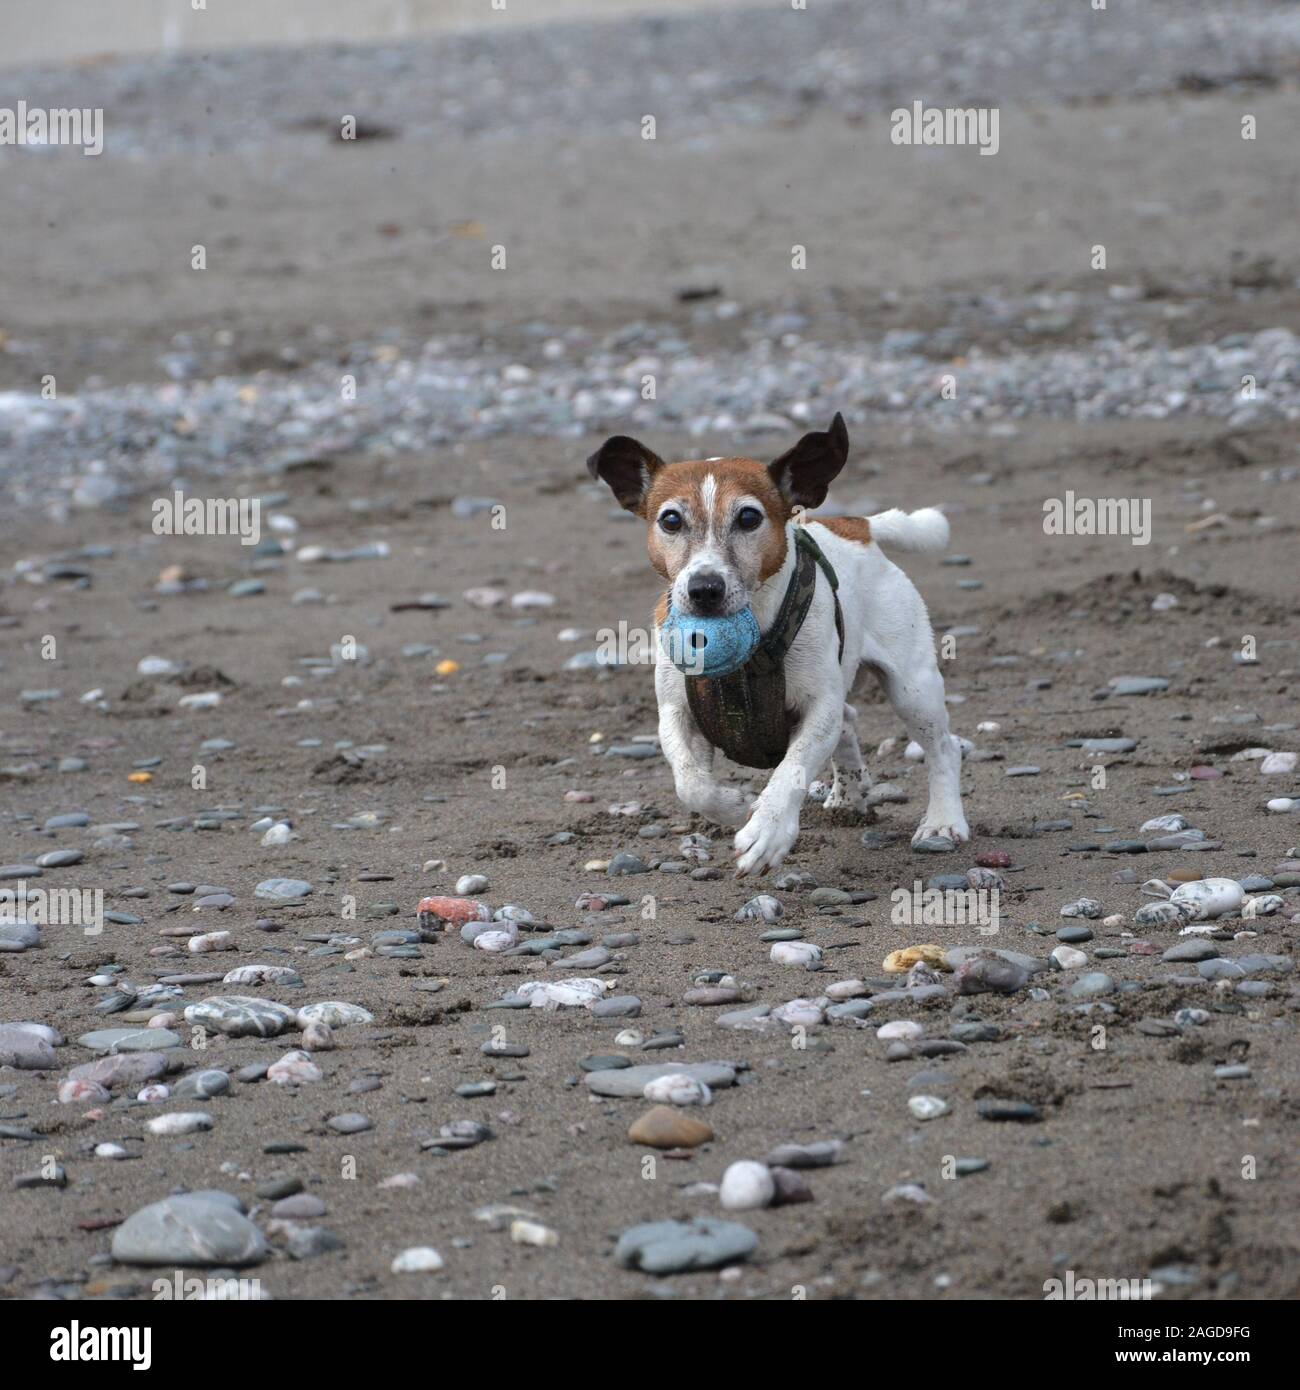 A white and tan Jack Russell terrier running over stones on a beach with a blue ball in his mouth Stock Photo